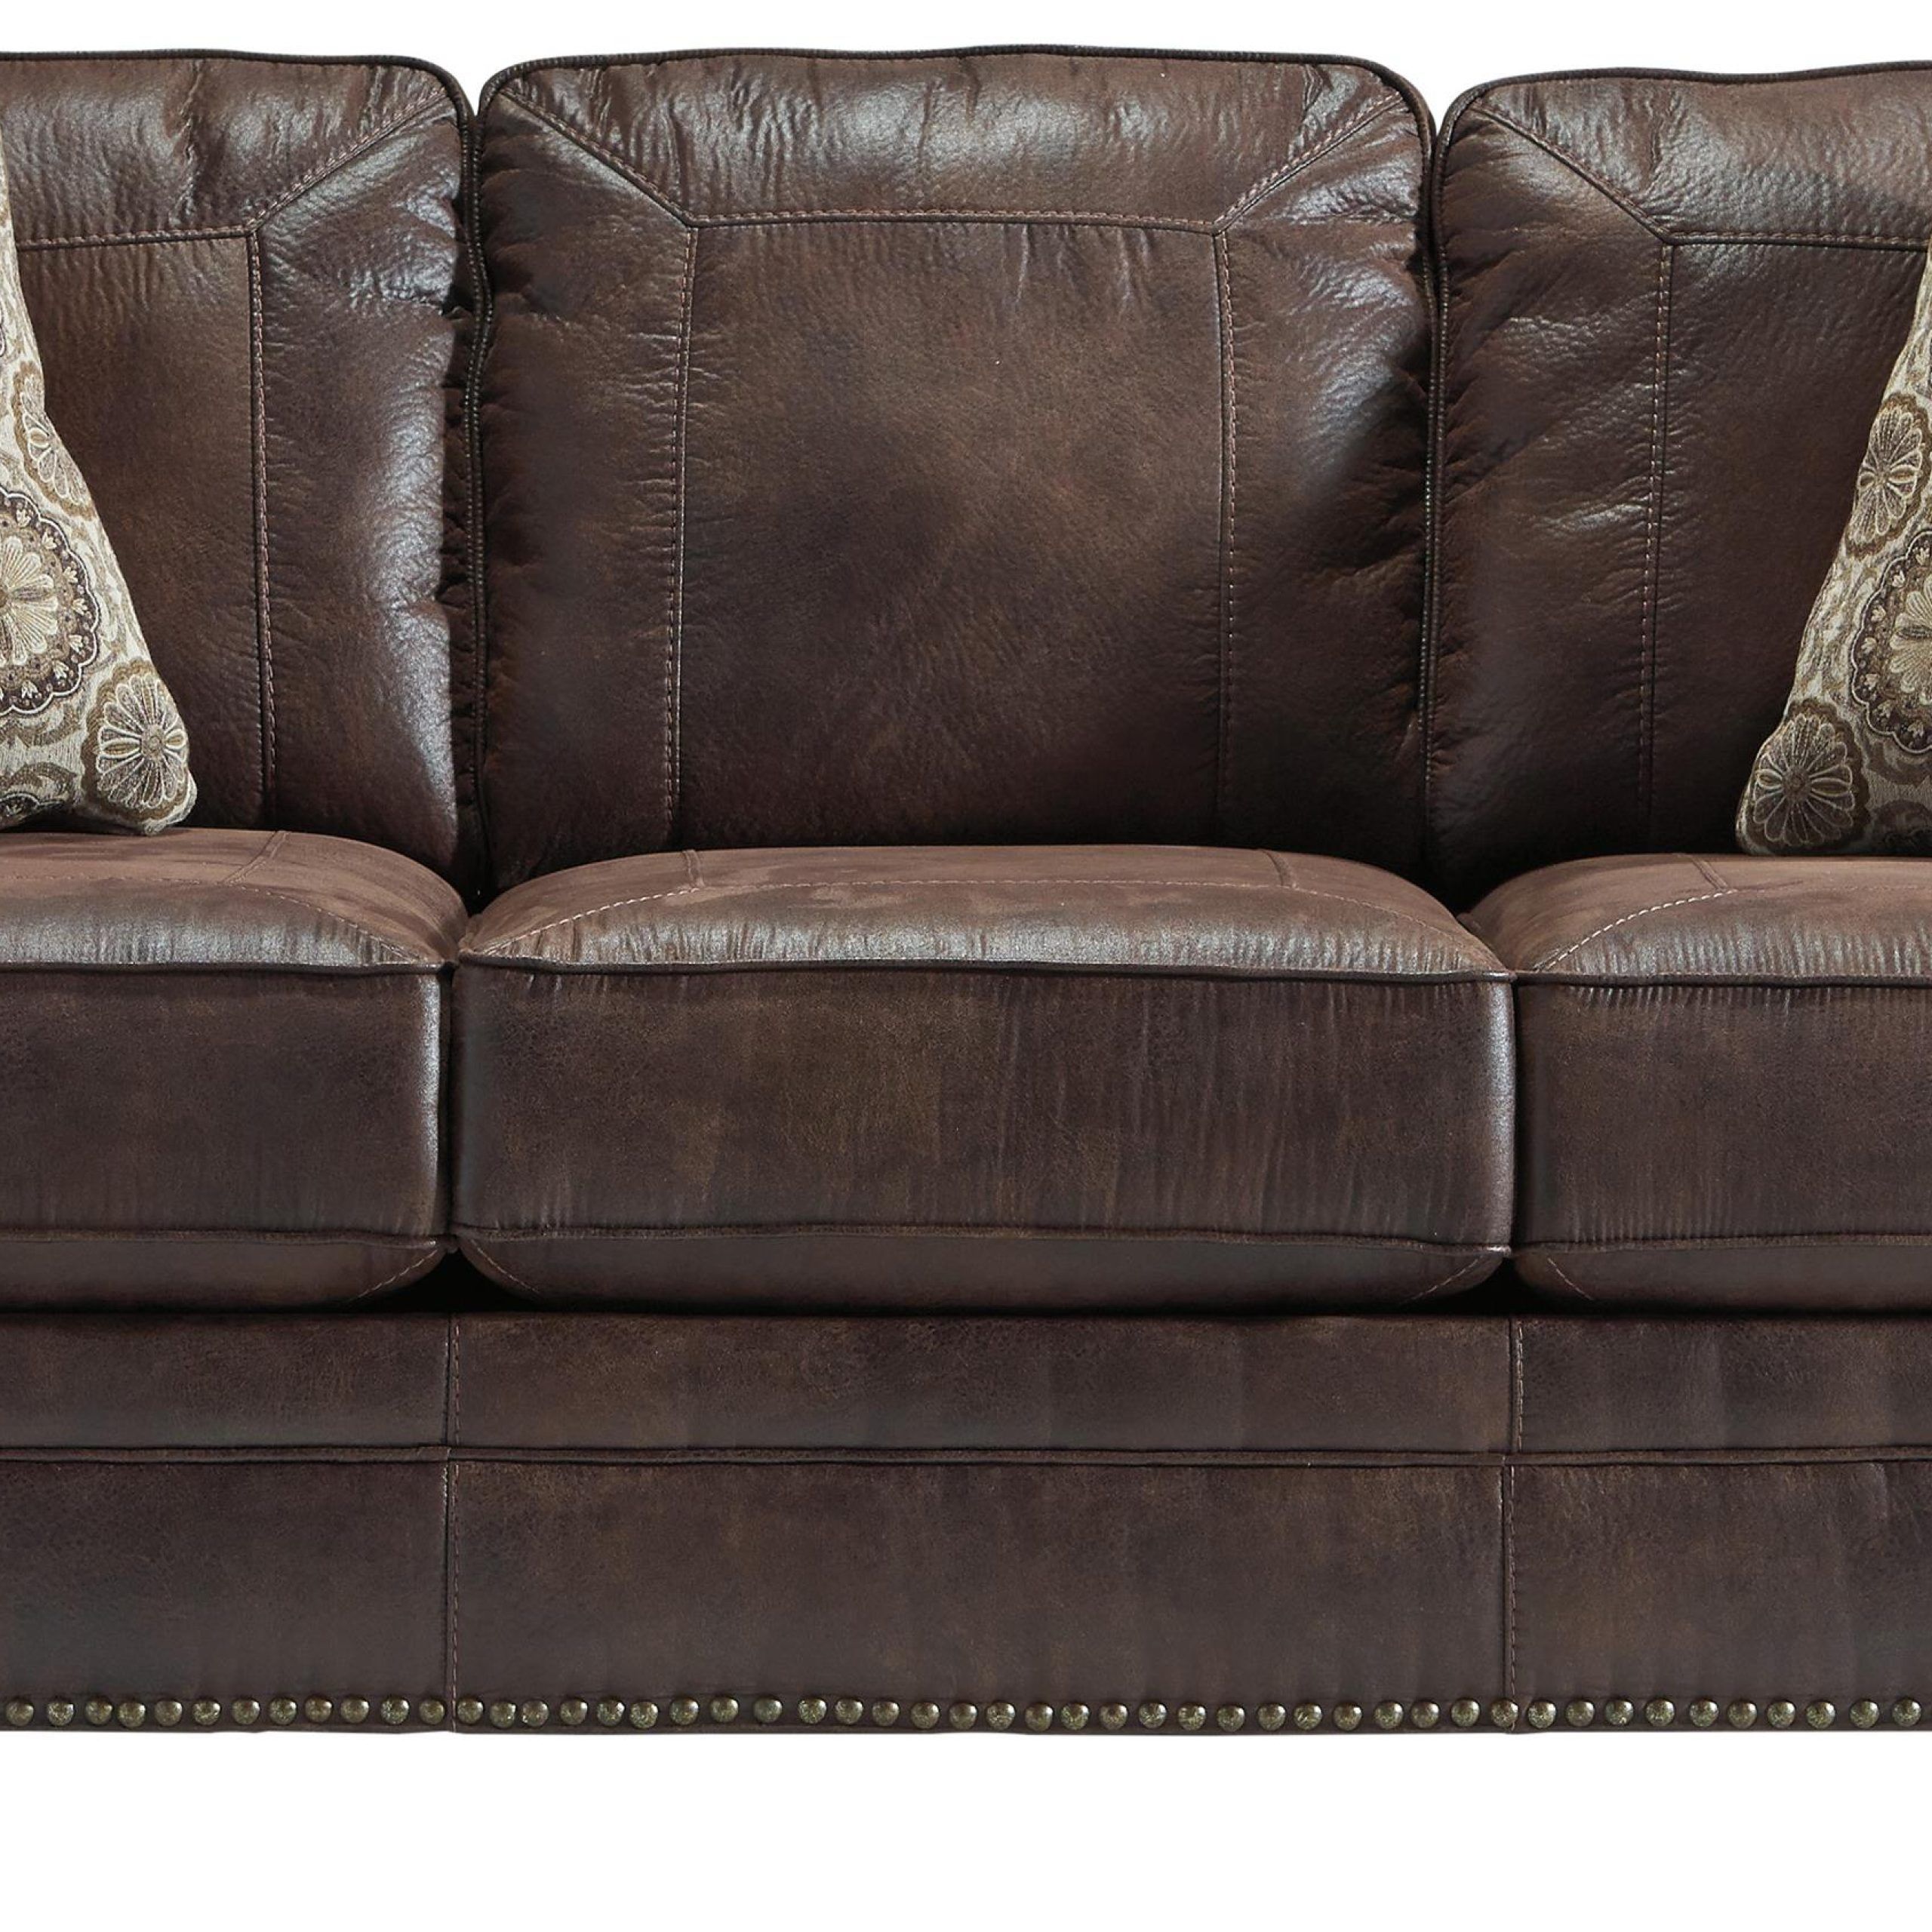 Benchcraft Breville 8000338 Faux Leather Sofa With Rolled Arms And With Regard To Faux Leather Sofas (Gallery 5 of 21)